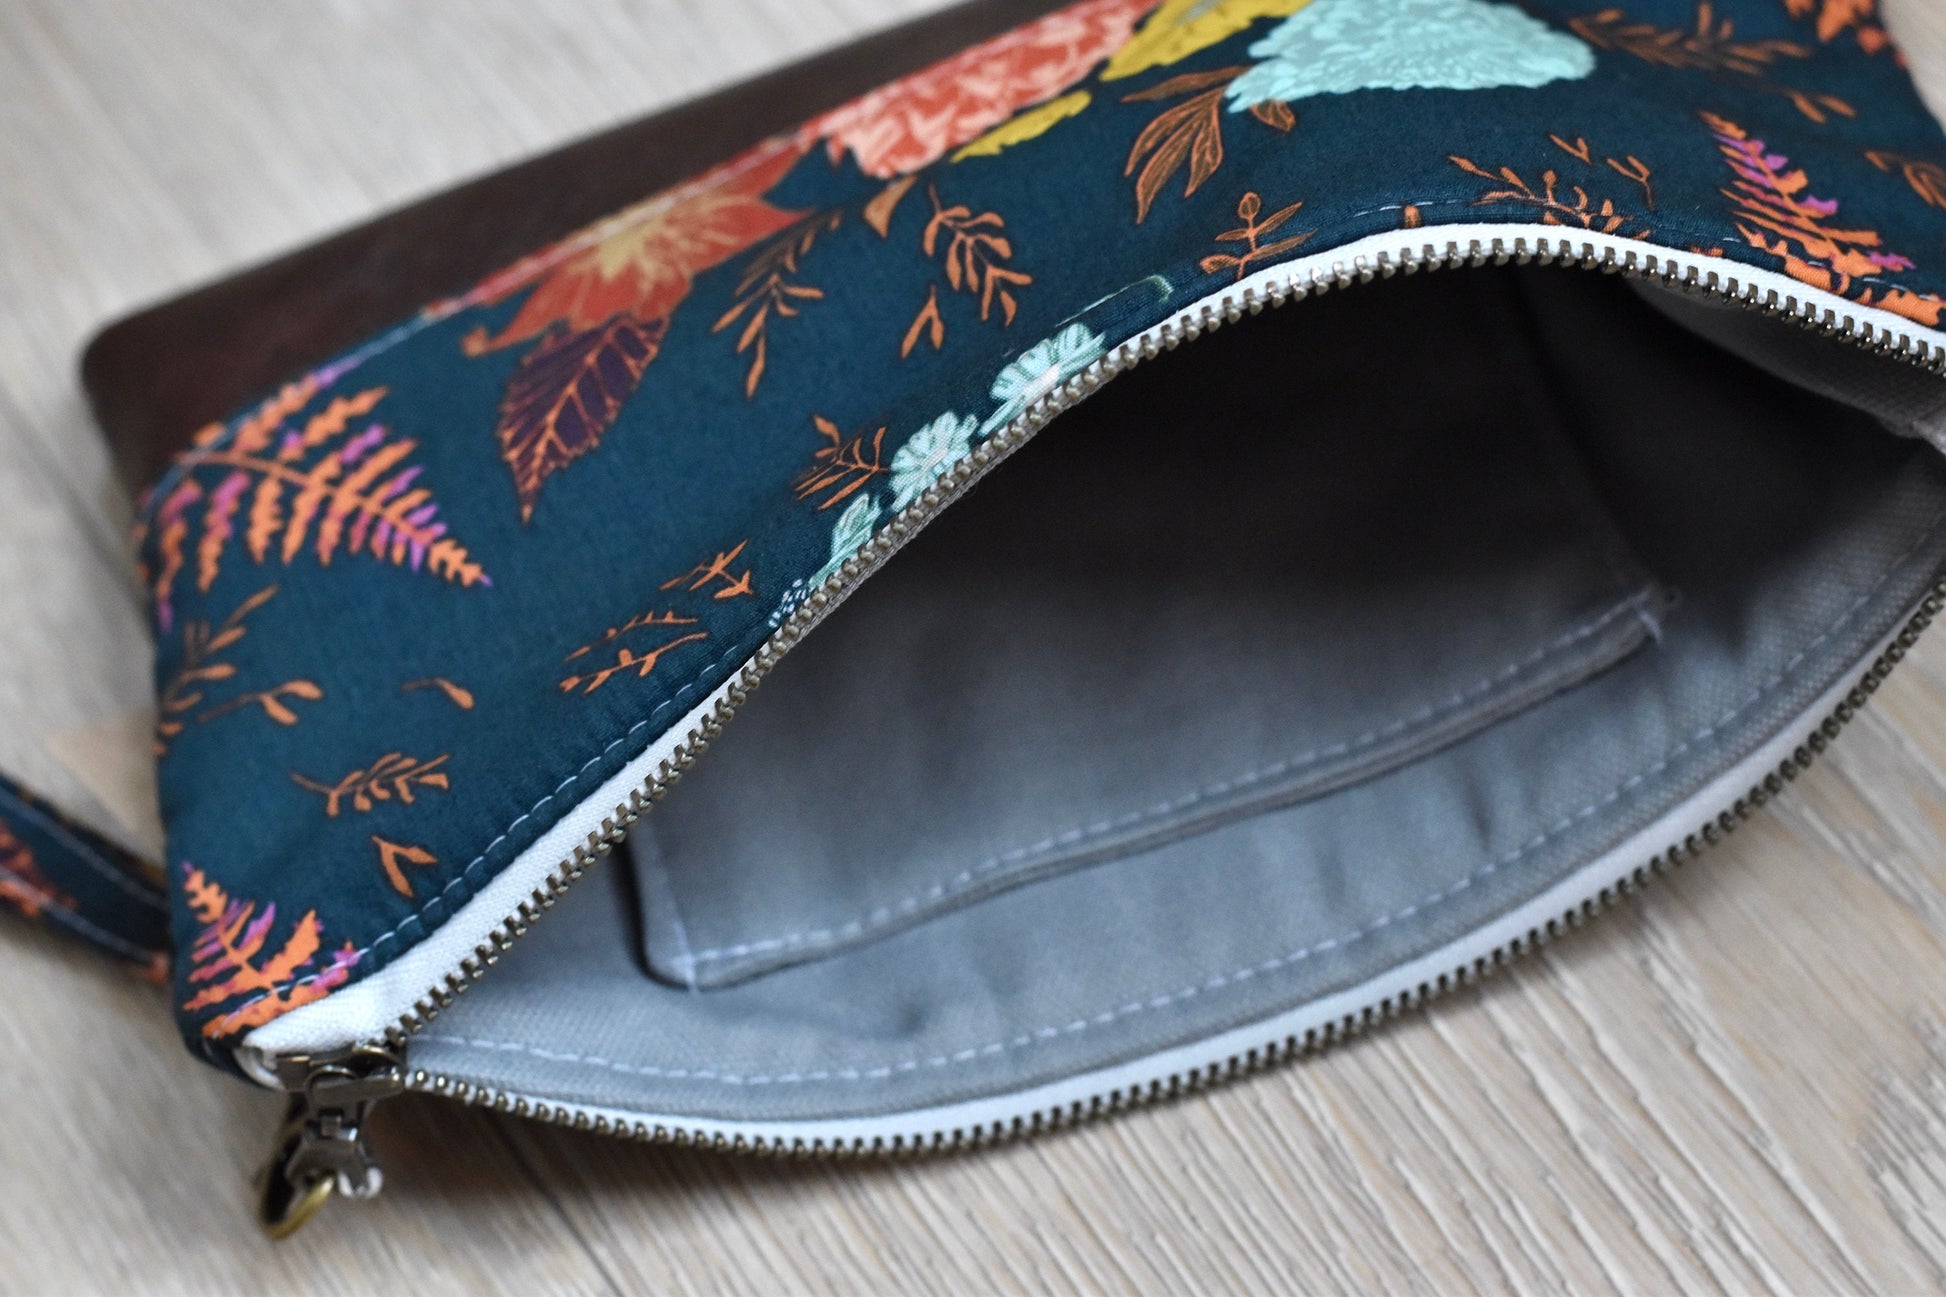 floral and fern navy wristlet with matching wrist strap and brown vinyl along the bottom. antique brass zipper. Lining is gray with slip pocket for cards